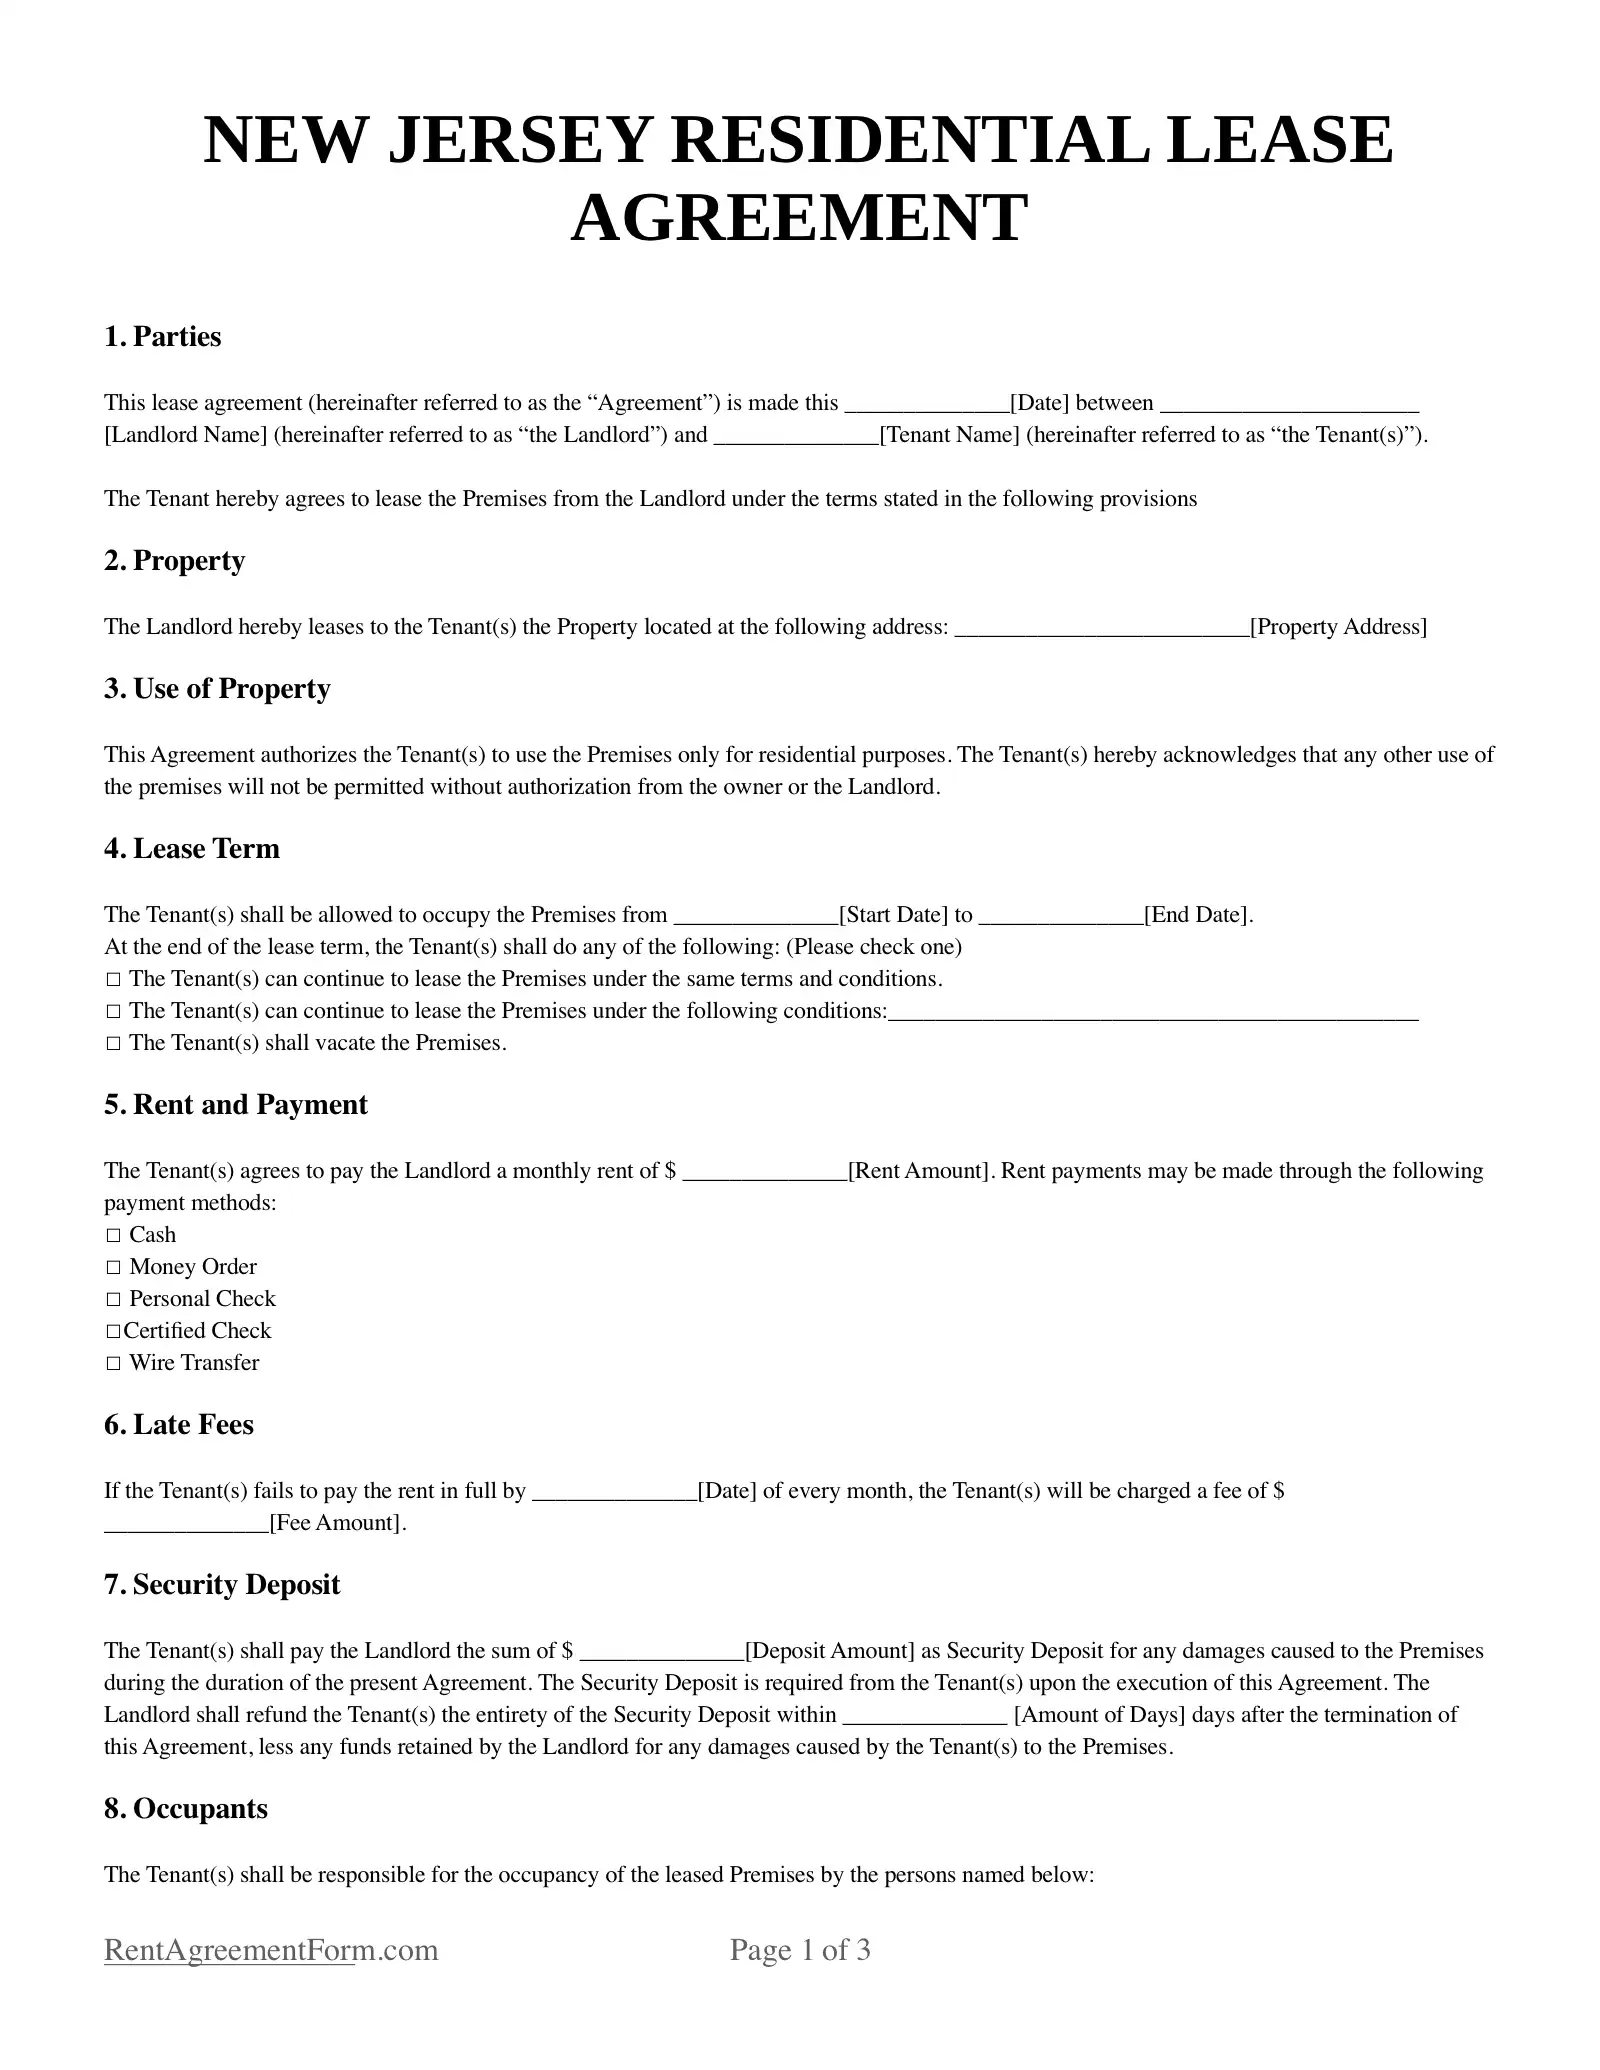 New Jersey Residential Lease Agreement Sample